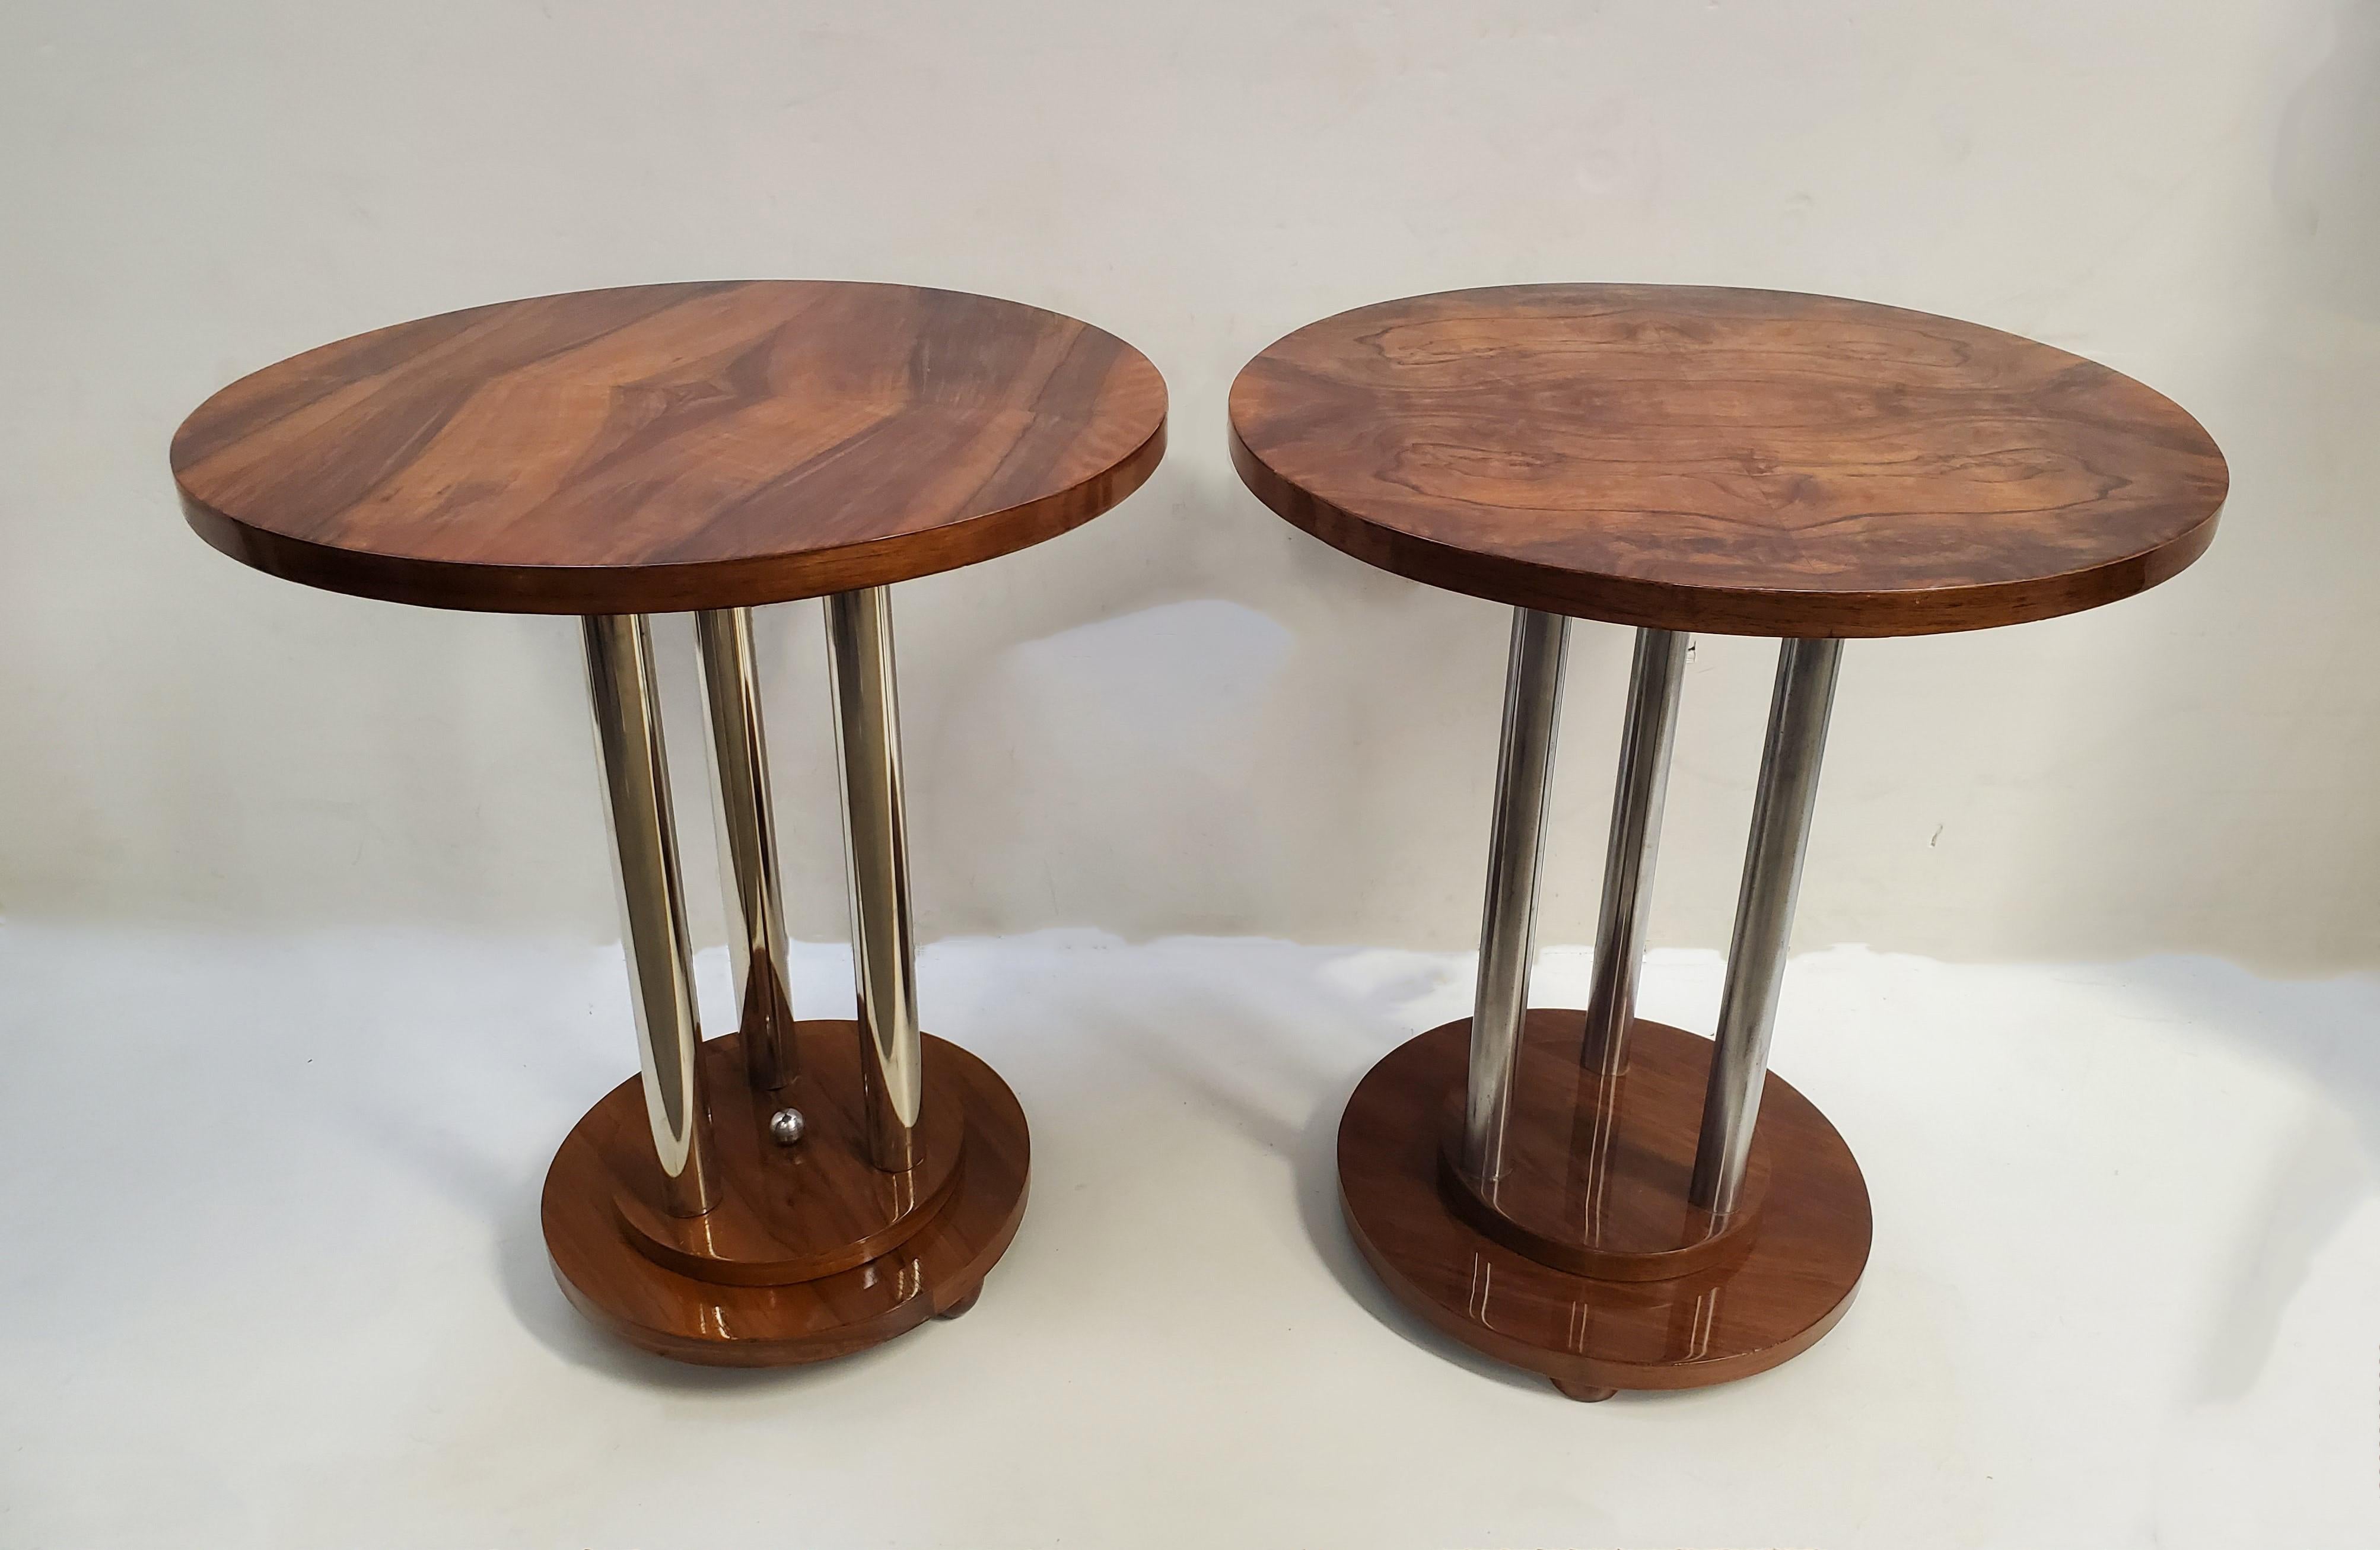 A similar pair of French Art Deco walnut side tables highlighted by nickeled metal accents. 
Three tubular metal poles support a beautifully grained, book matched circular wood top and rest on a circular stepped base ending with small toupie